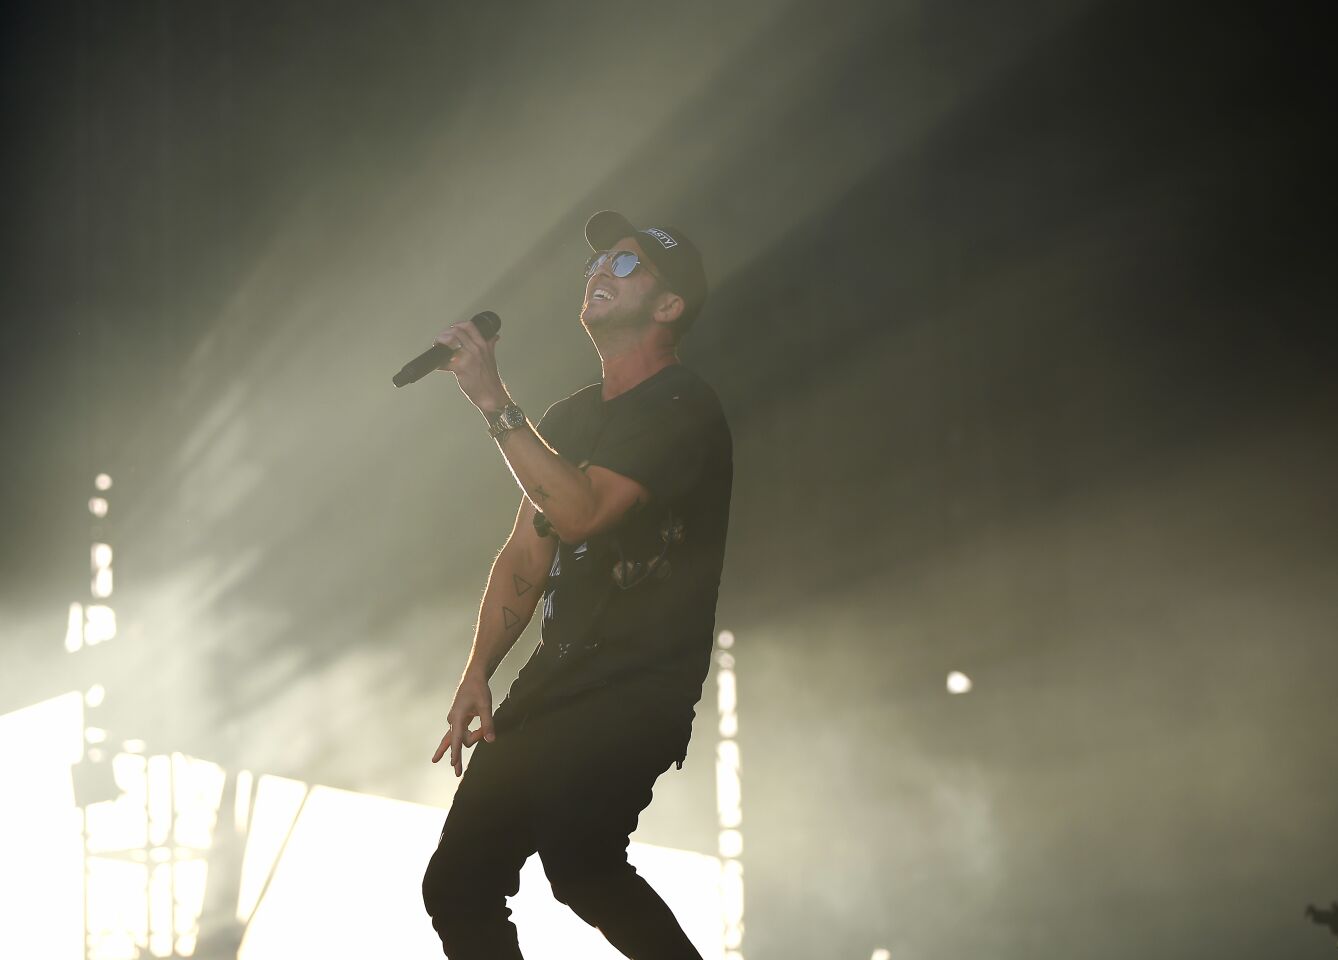 Ryan Tedder of the band OneRepublic performs at the Sunset Cliffs stage at KAABOO Del Mar on Sept. 14, 2019.